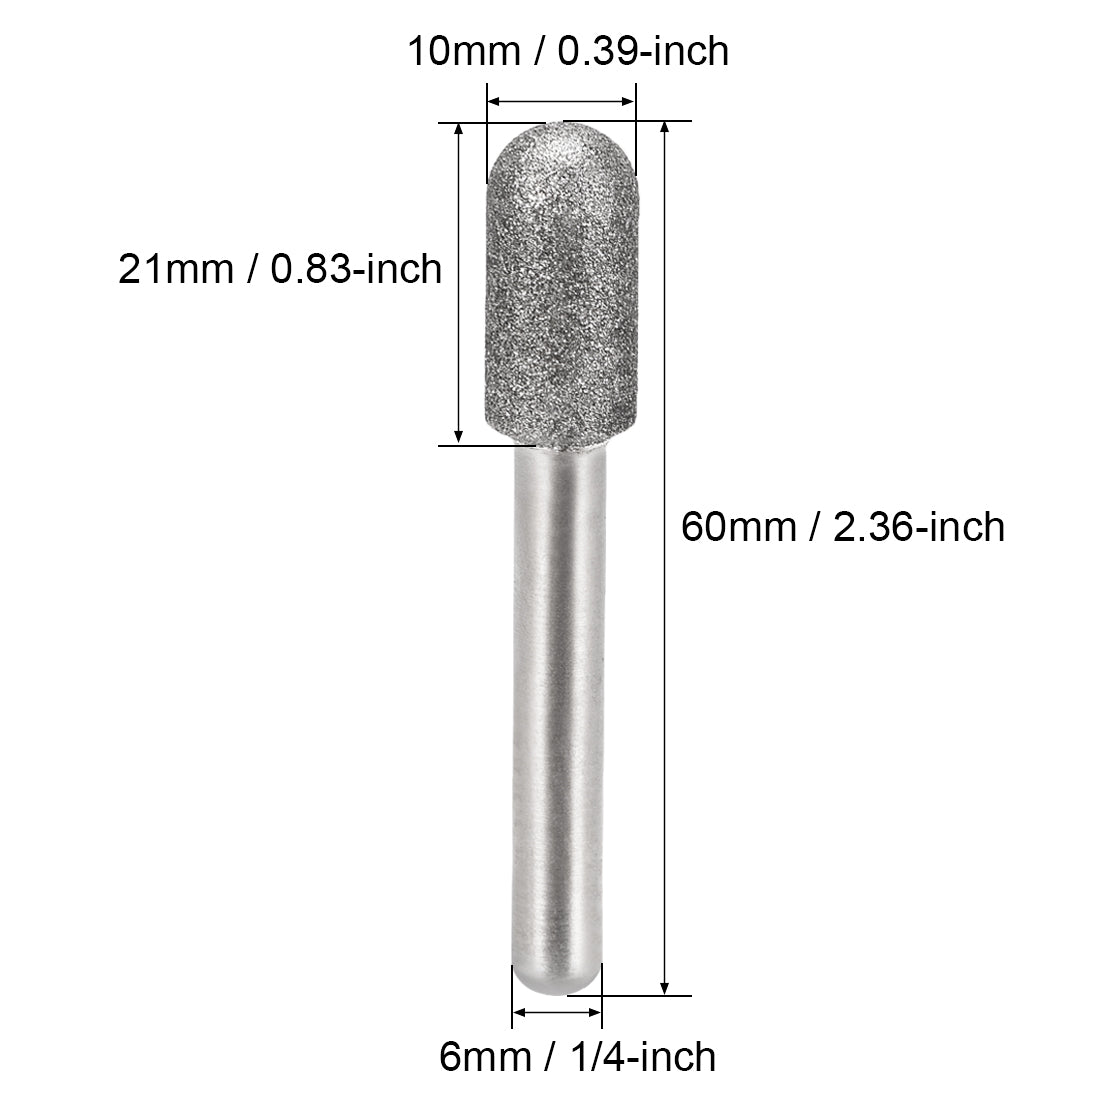 Uxcell Uxcell Diamond Burrs Grinding Drill Bits for Carving Rotary Tool 1/4-Inch Shank 10mm Cylindrical Ball Nose 150 Grit 2 Pcs